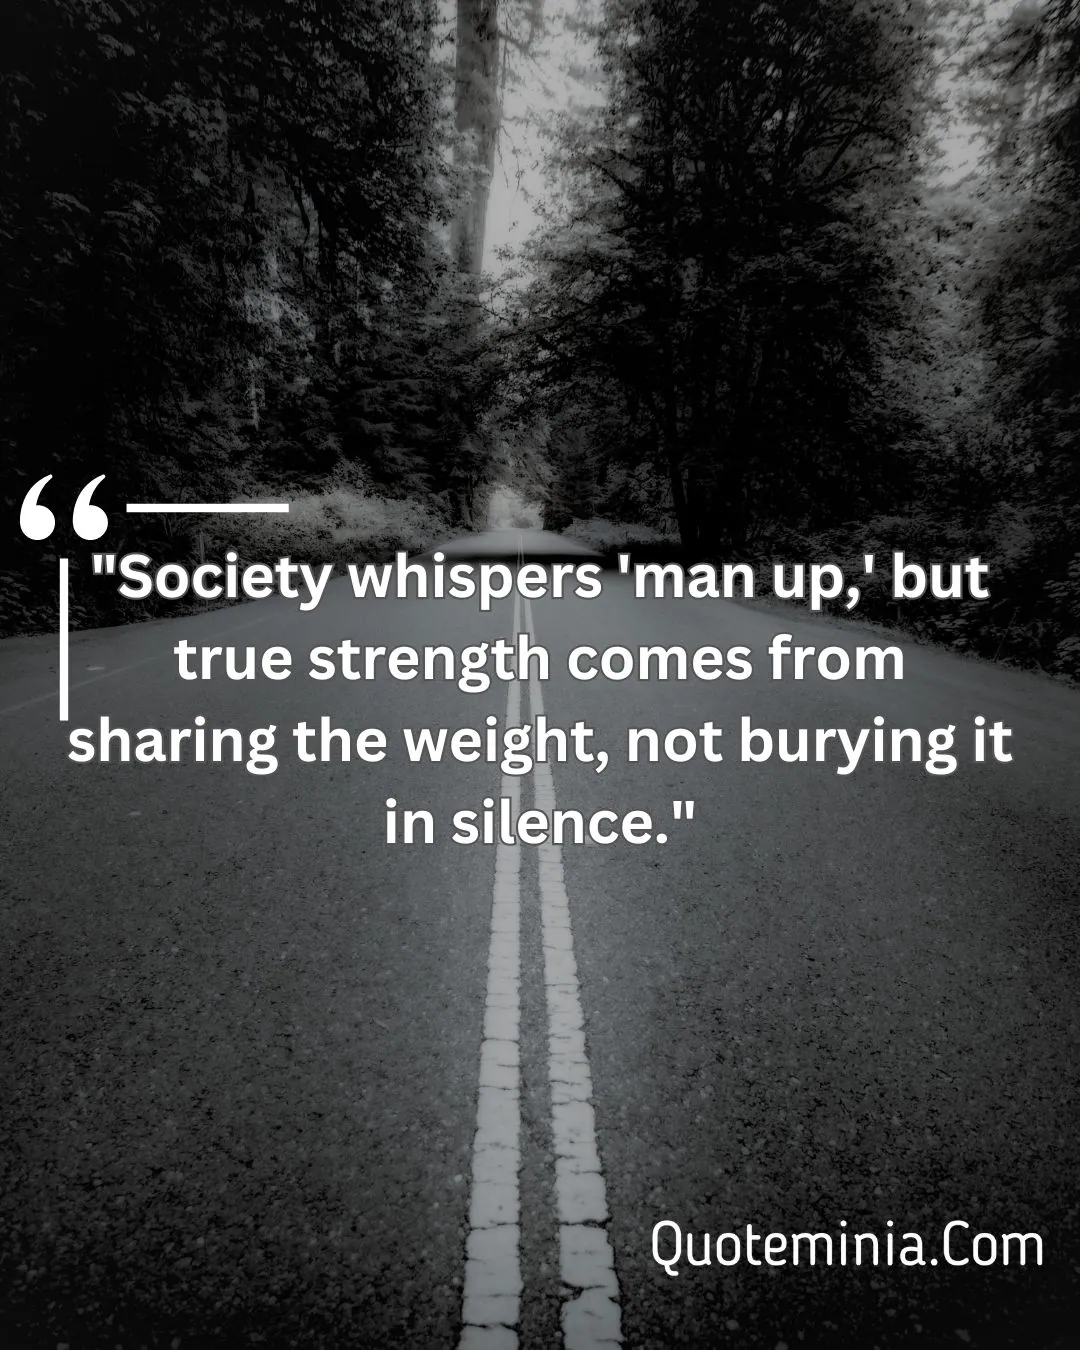 Men Suffer in Silence Quotes Image 1